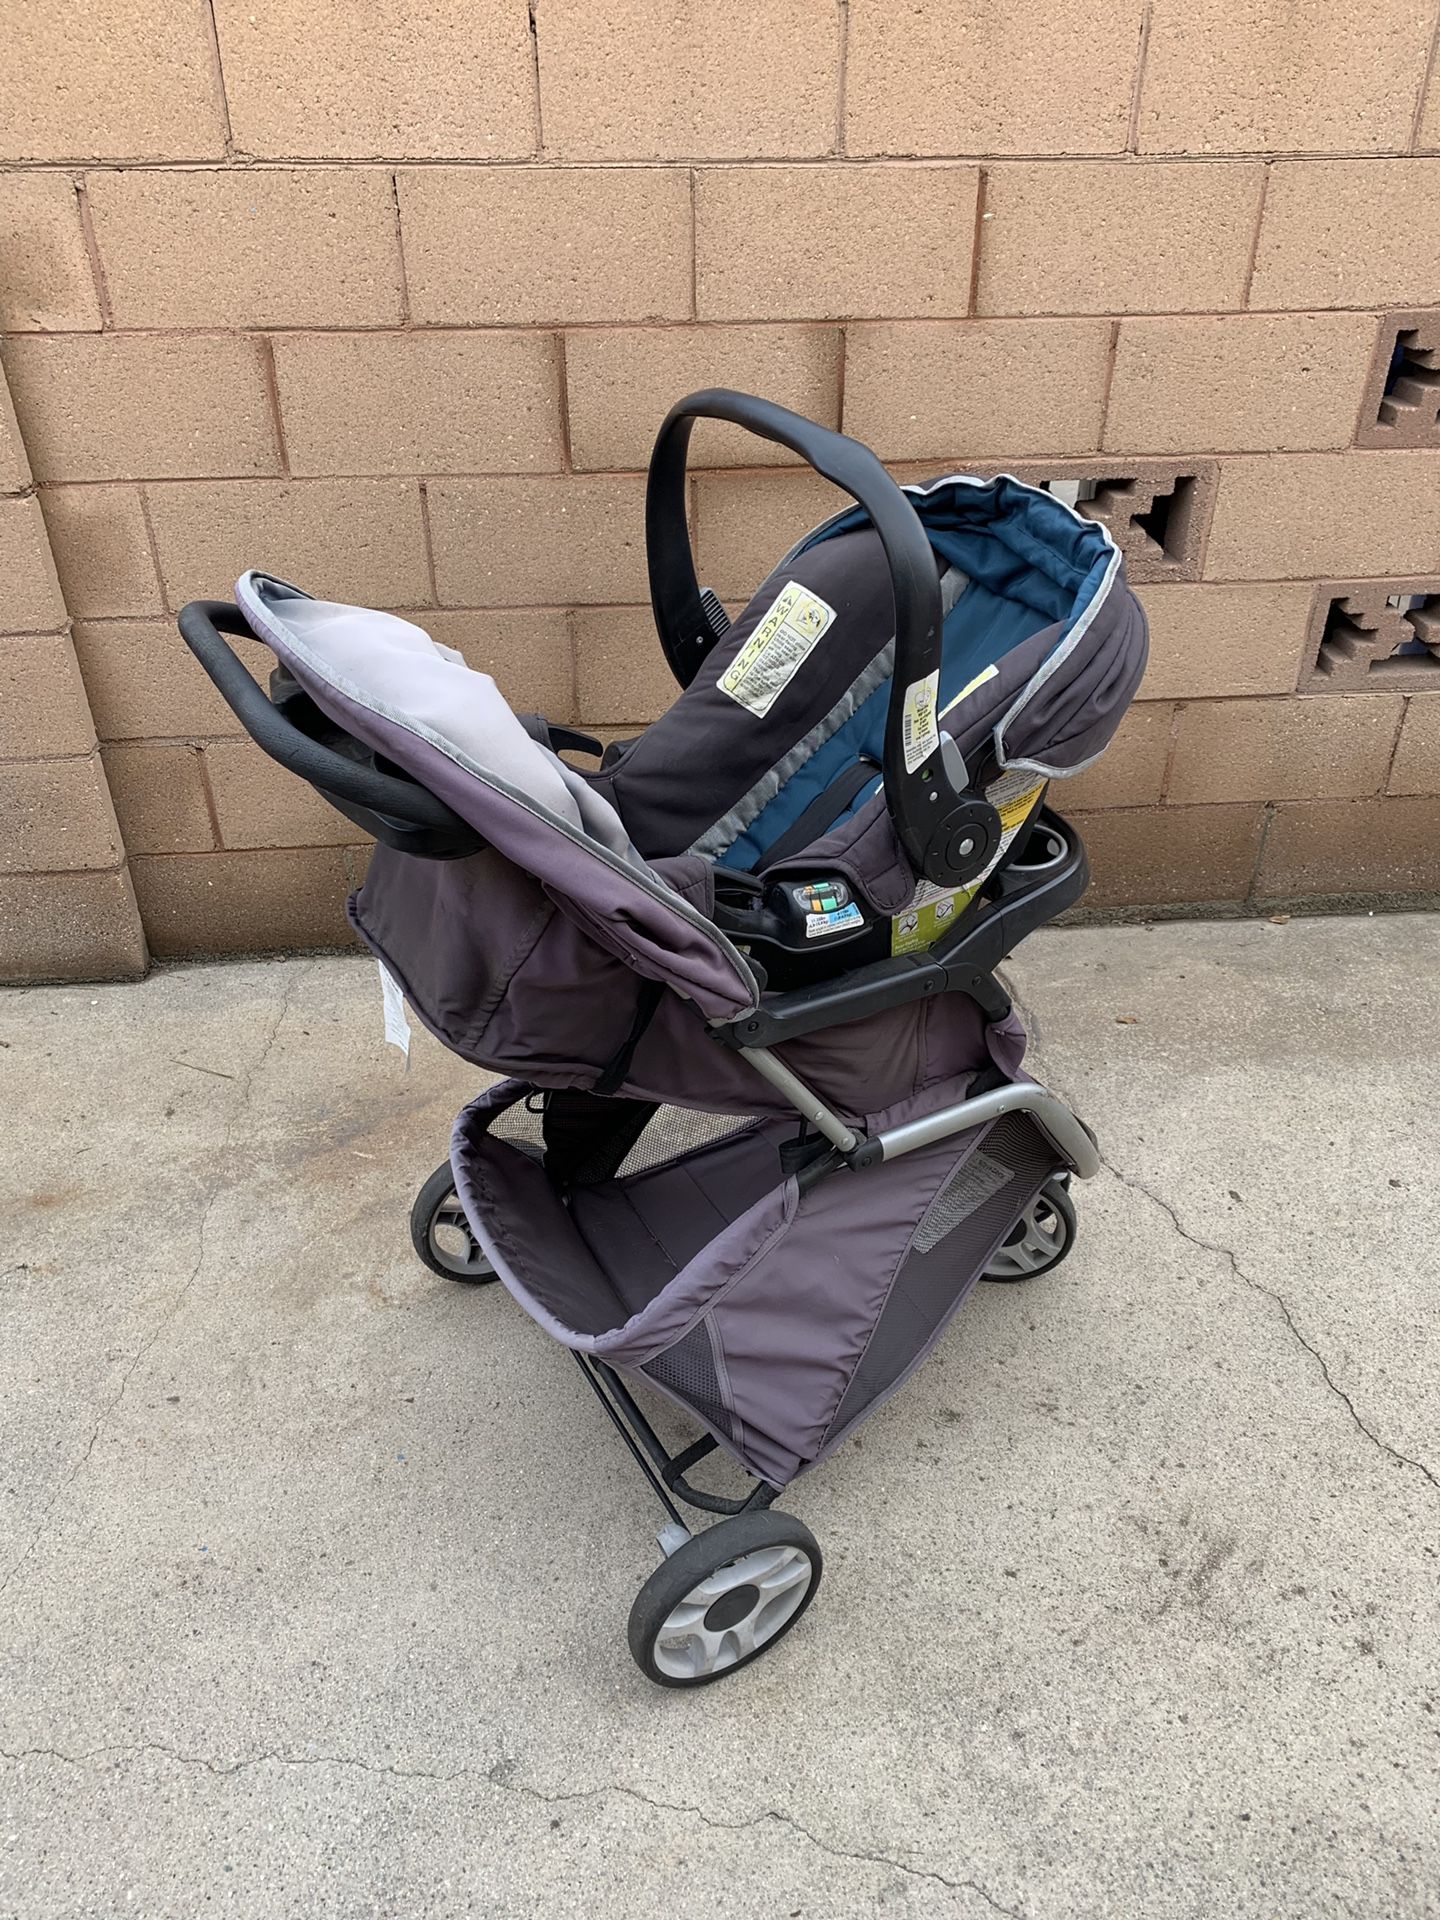 Car seat + stroller and 2 bases. Great as a dog carrier too!